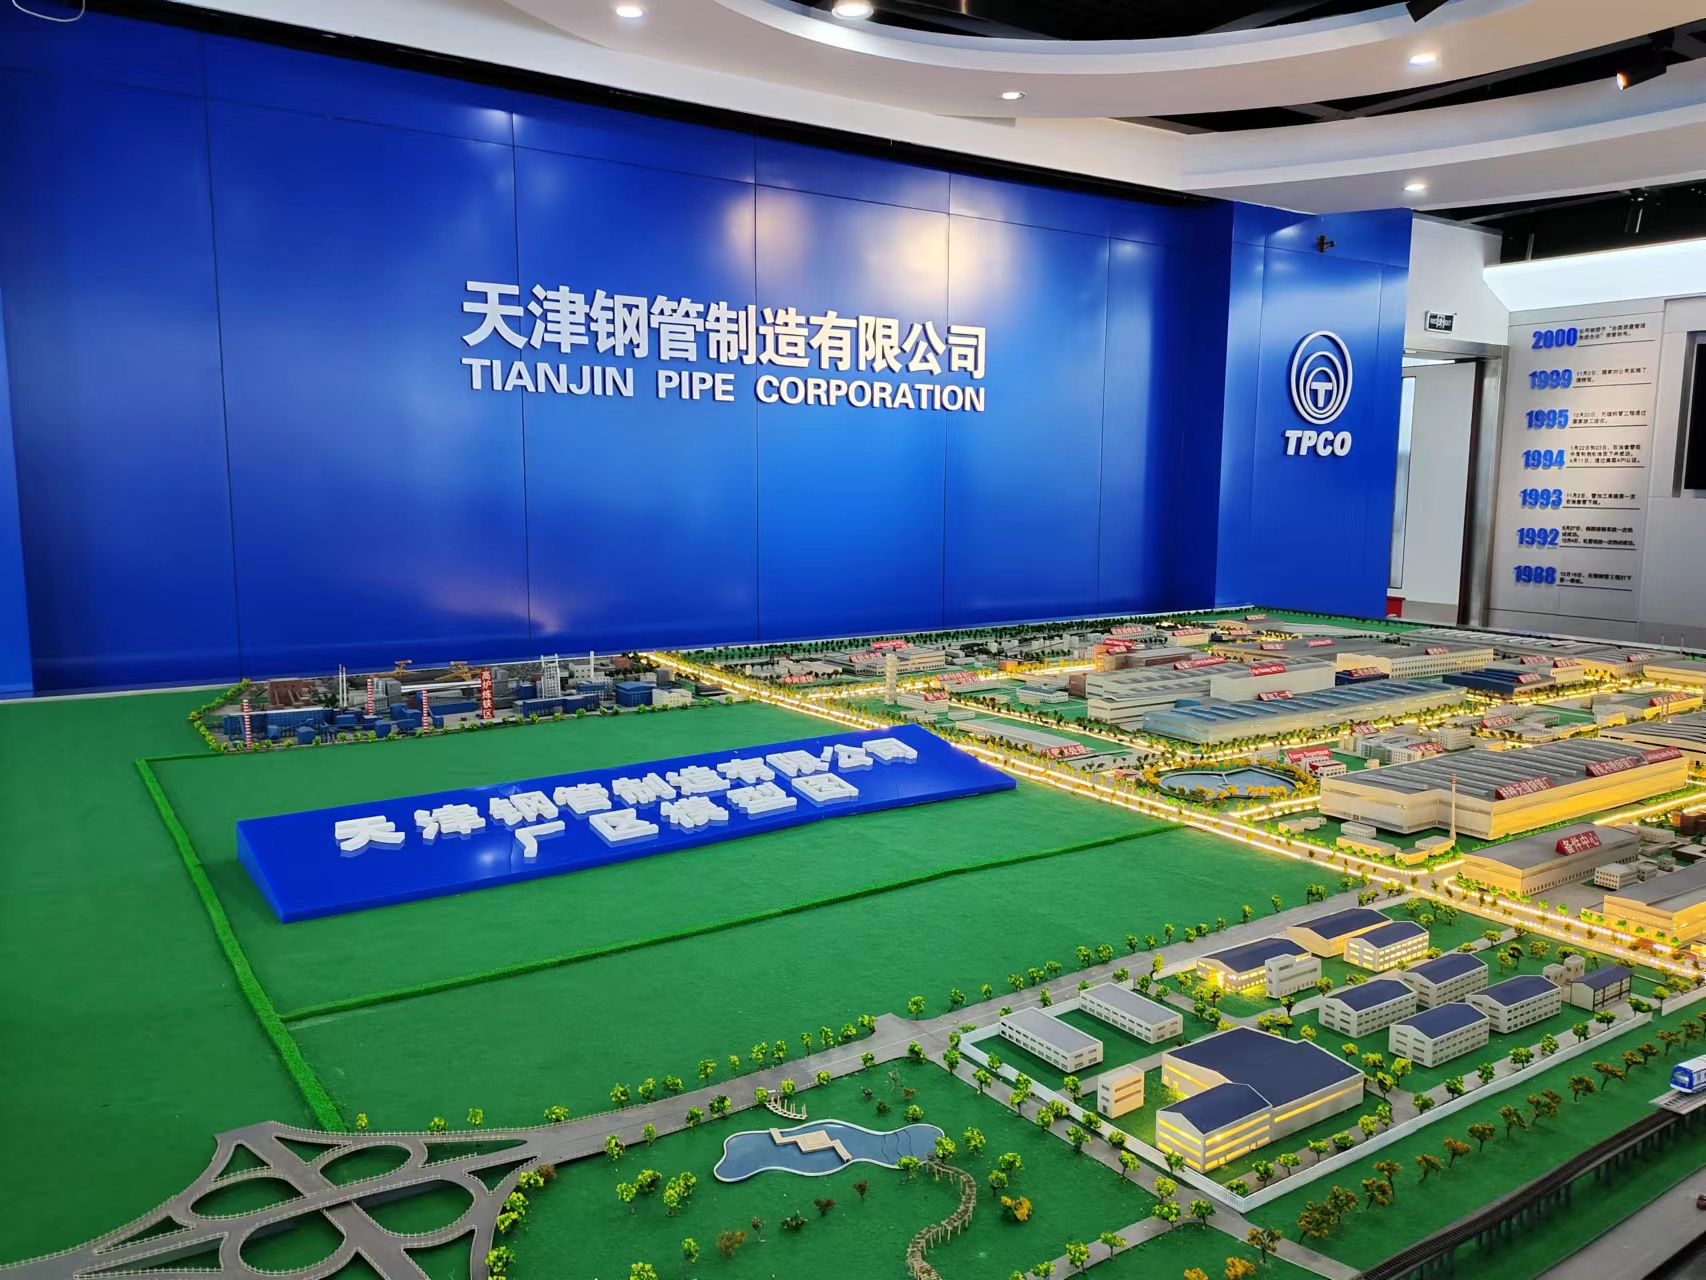 Completed the bid for Tianjin Pipe